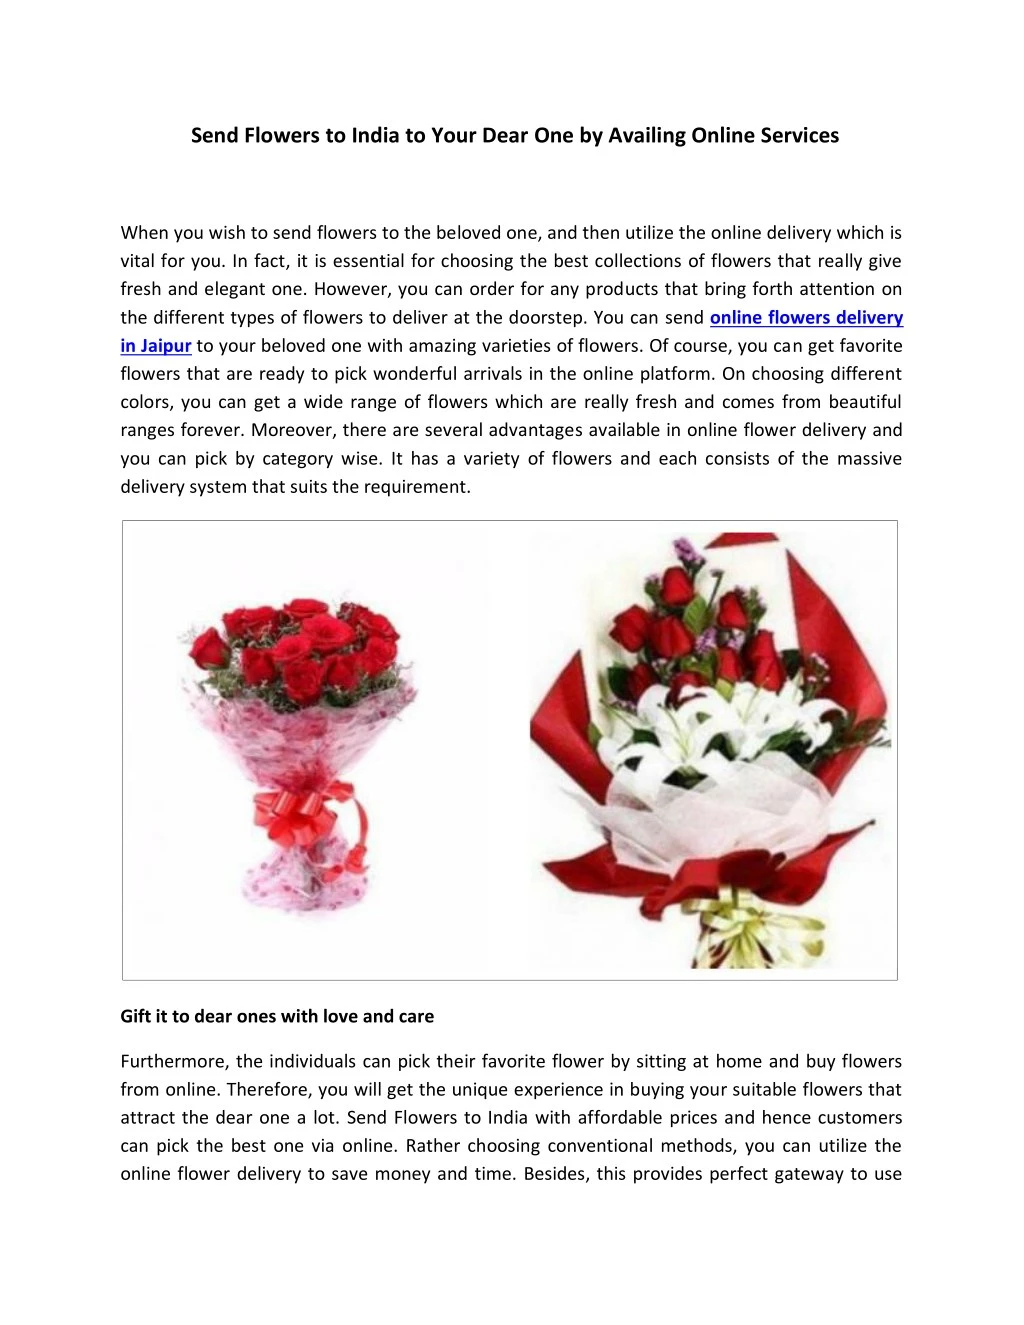 PPT - Send Flowers to India to Your Dear One by Availing Online ...